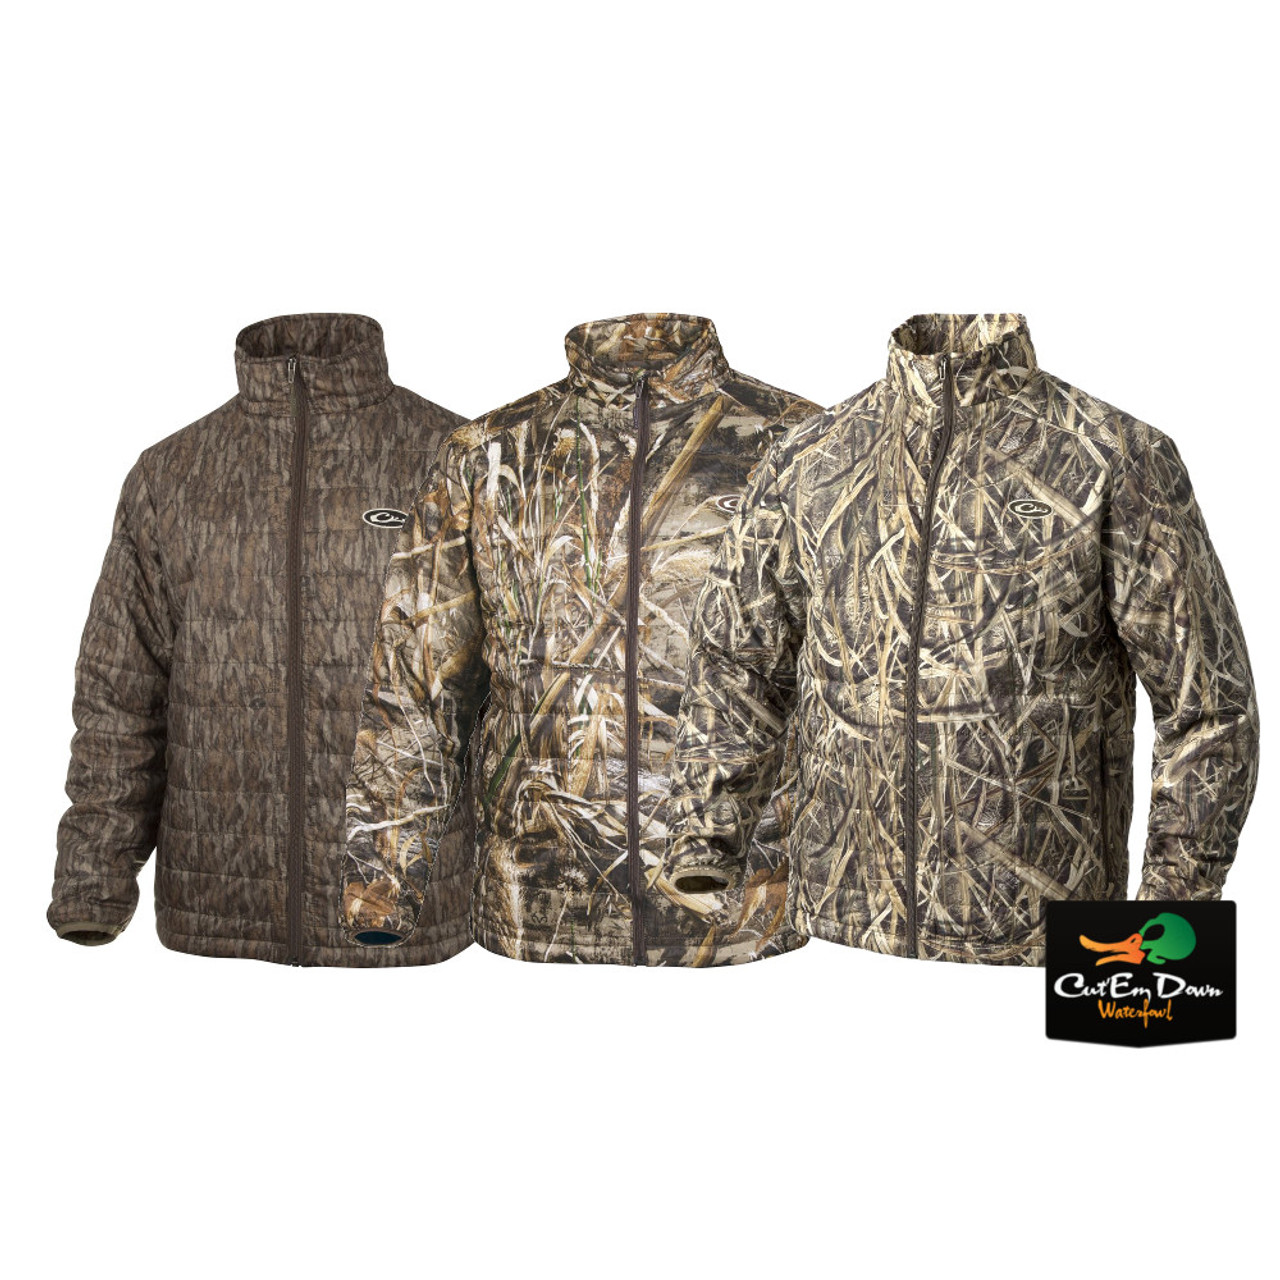 Drake Waterfowl Synthetic Down Pac-Jacket - Camo